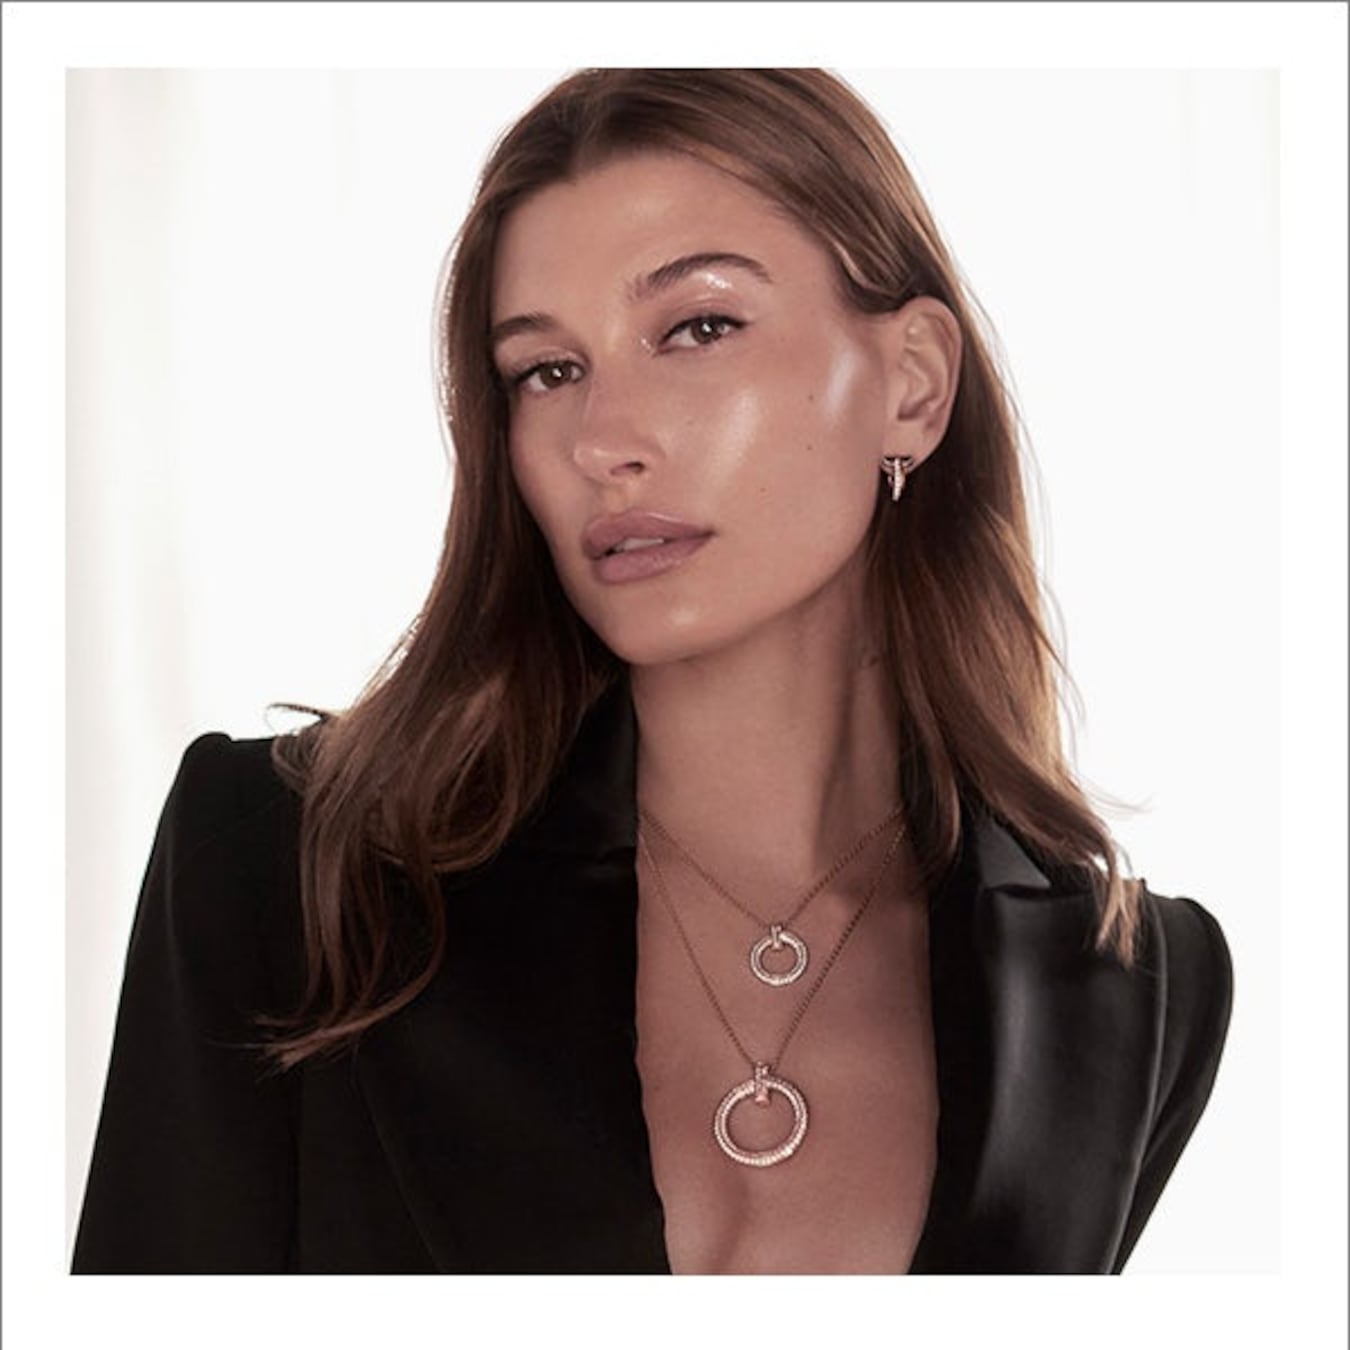 Project-Hailey Bieber x Tiffany T Collection